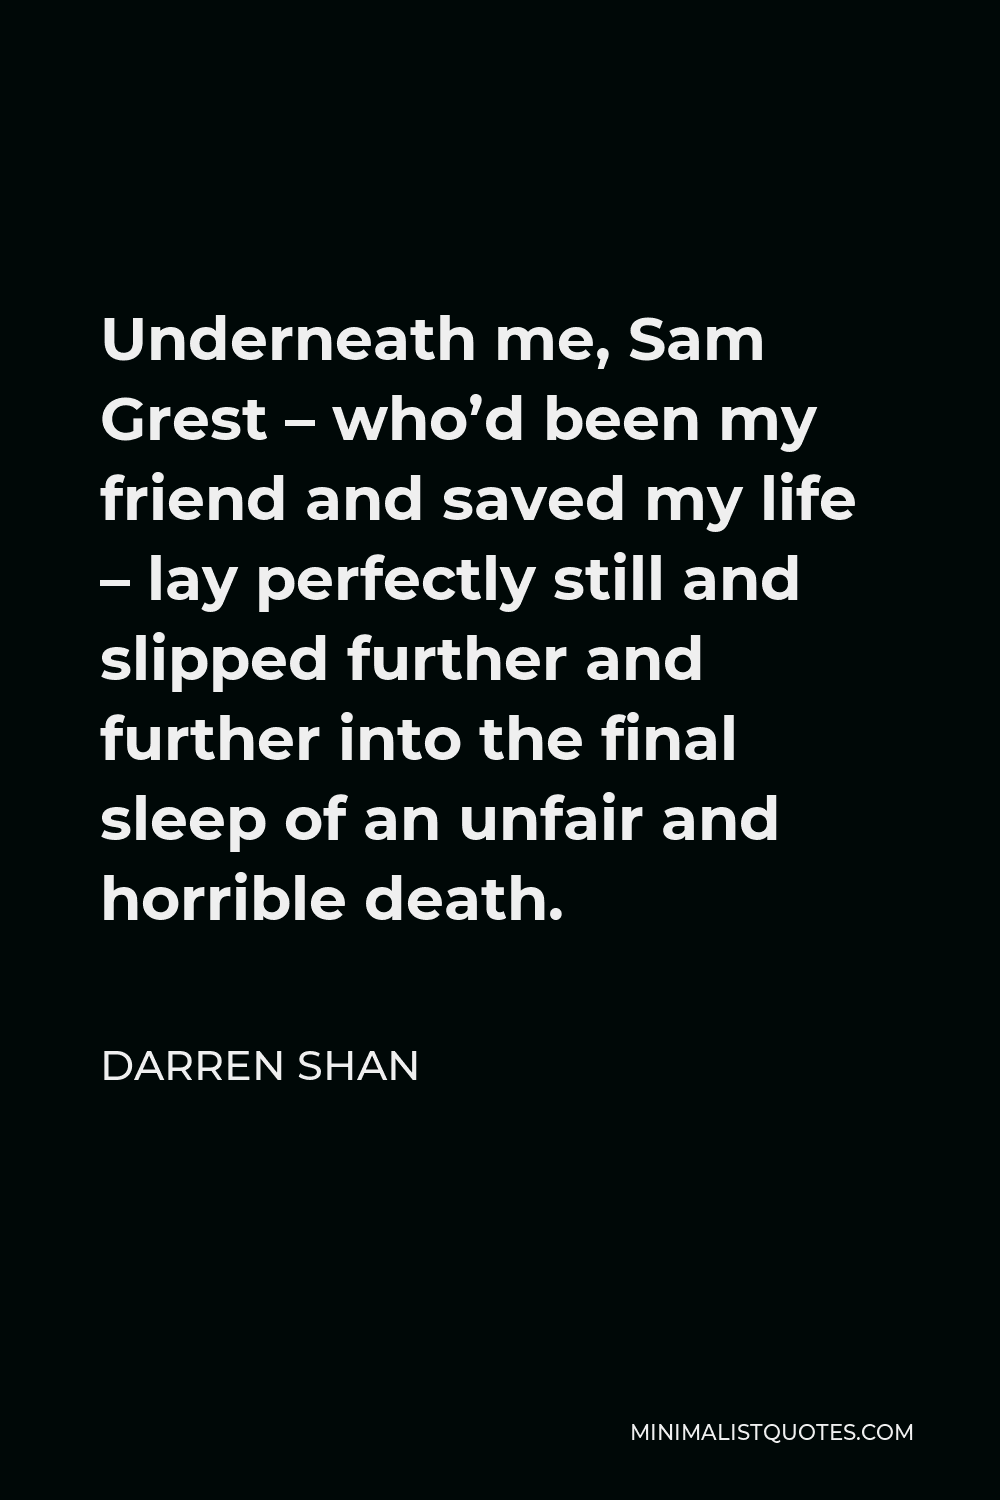 Darren Shan Quote - Underneath me, Sam Grest – who’d been my friend and saved my life – lay perfectly still and slipped further and further into the final sleep of an unfair and horrible death.